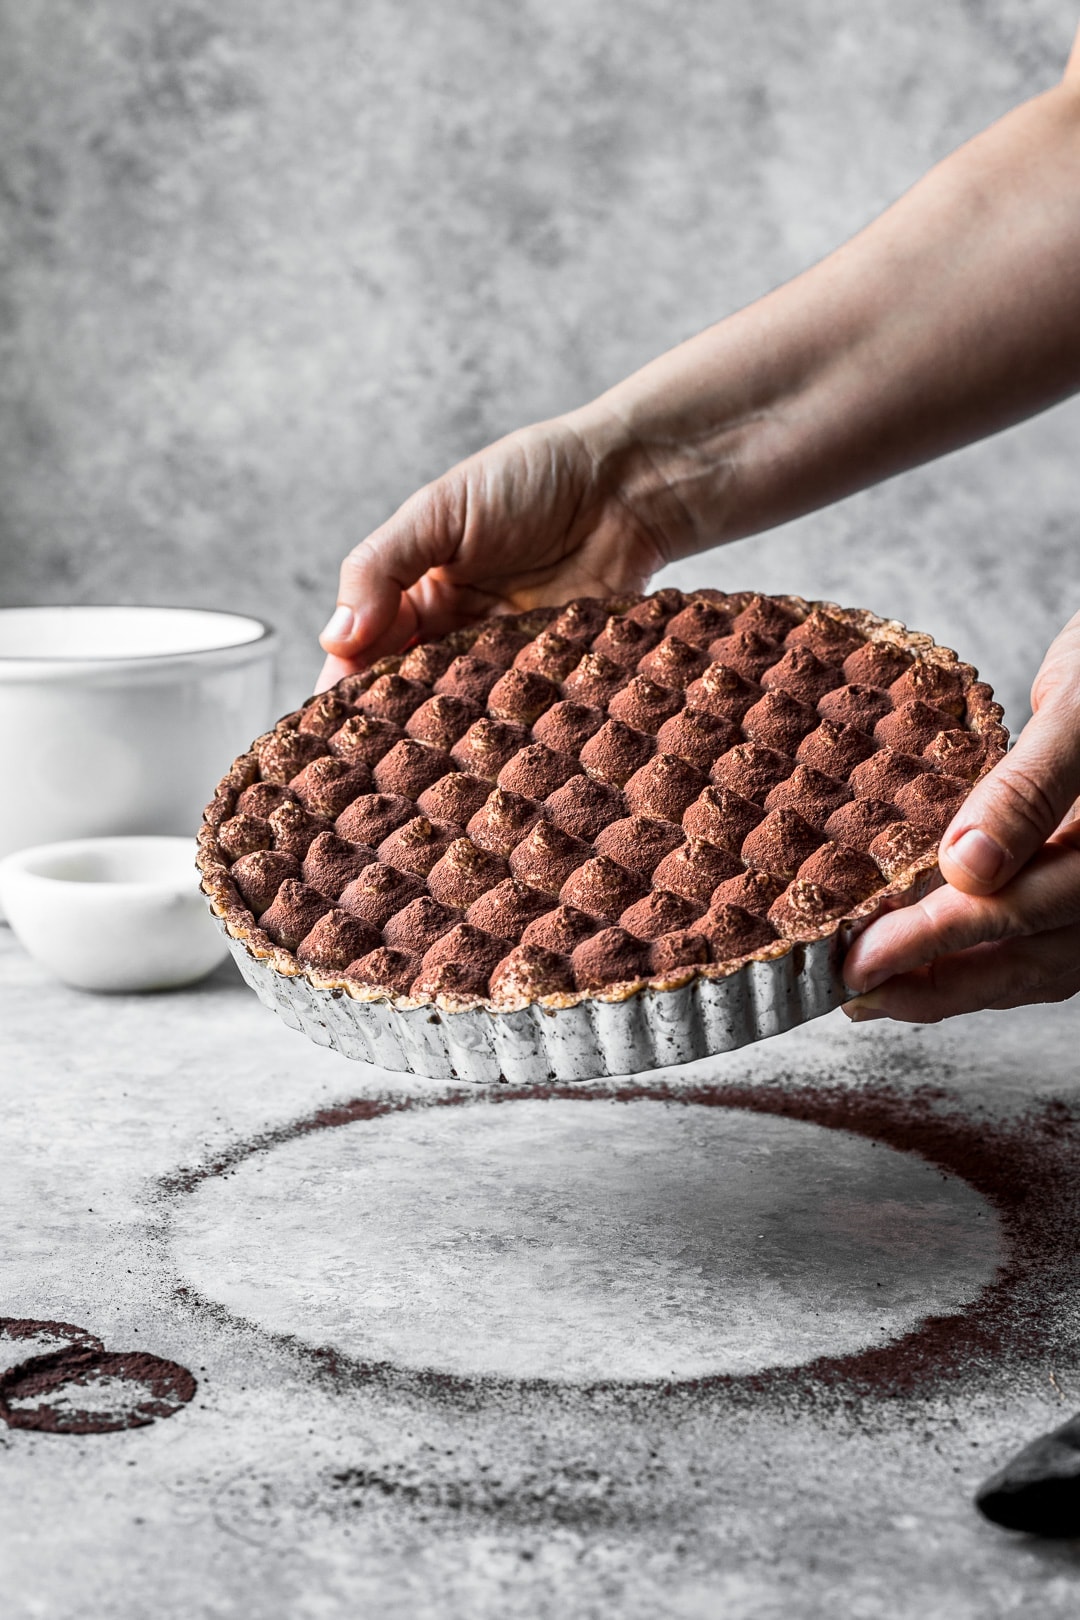 Hands holding a chocolate coffee mascarpone tart for display against a grey background